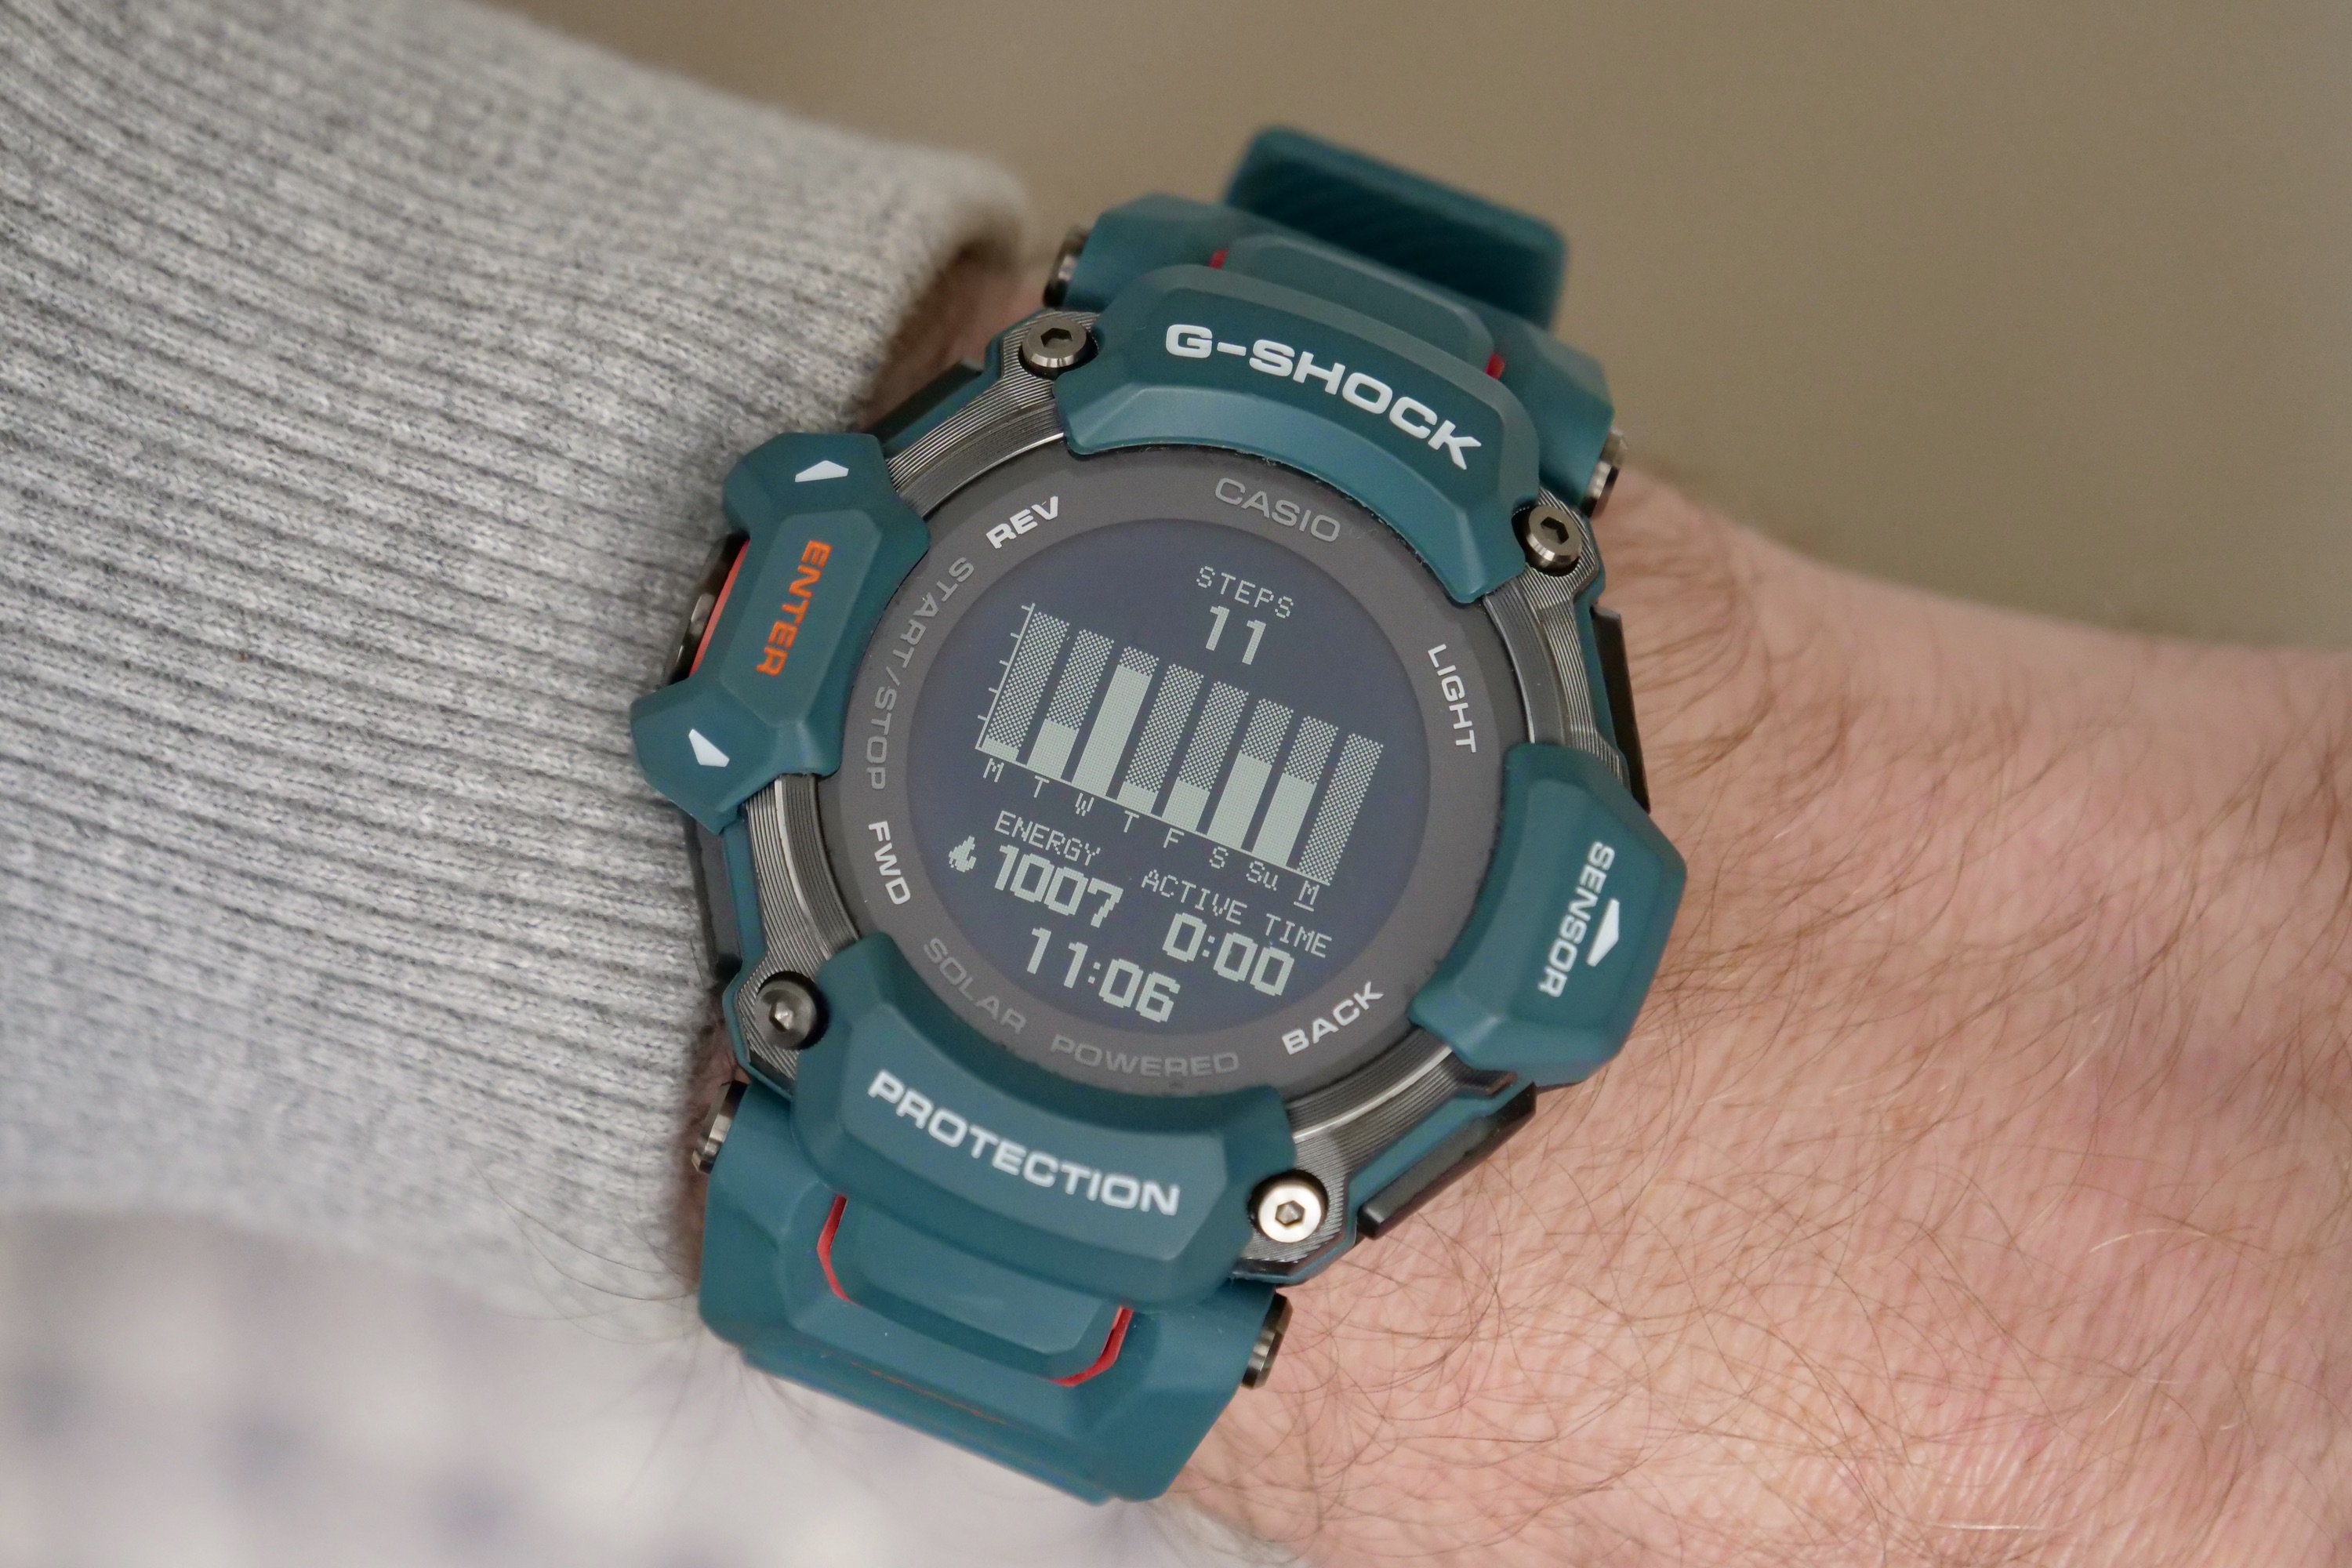 Daily activity display on the G-Shock GBD-H2000.